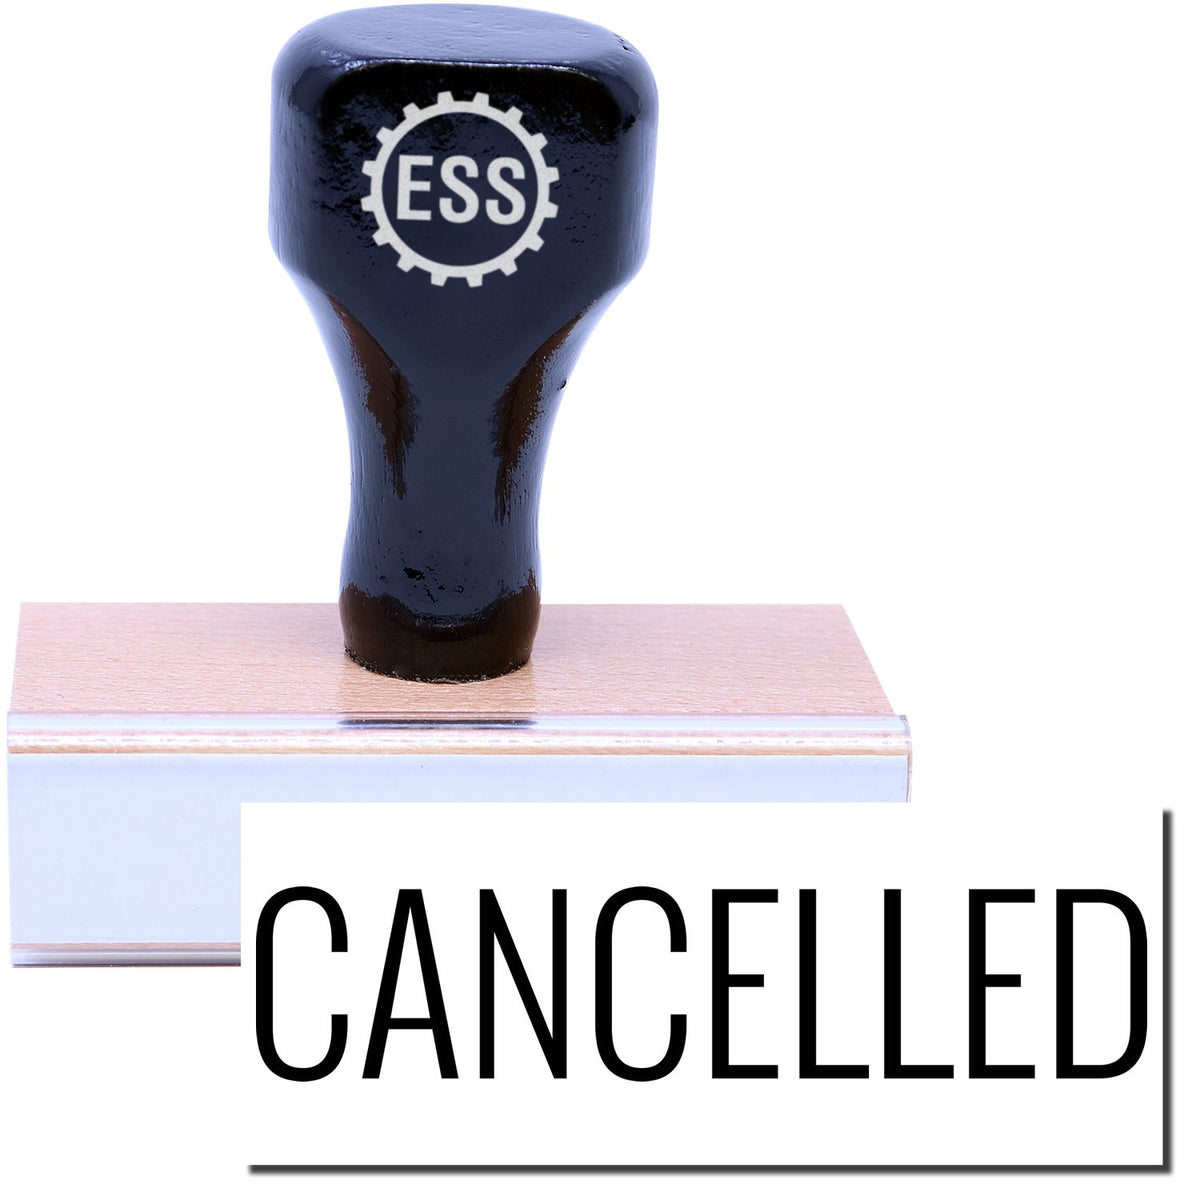 A stock office rubber stamp with a stamped image showing how the text &quot;CANCELLED&quot; in a large narrow font is displayed after stamping.